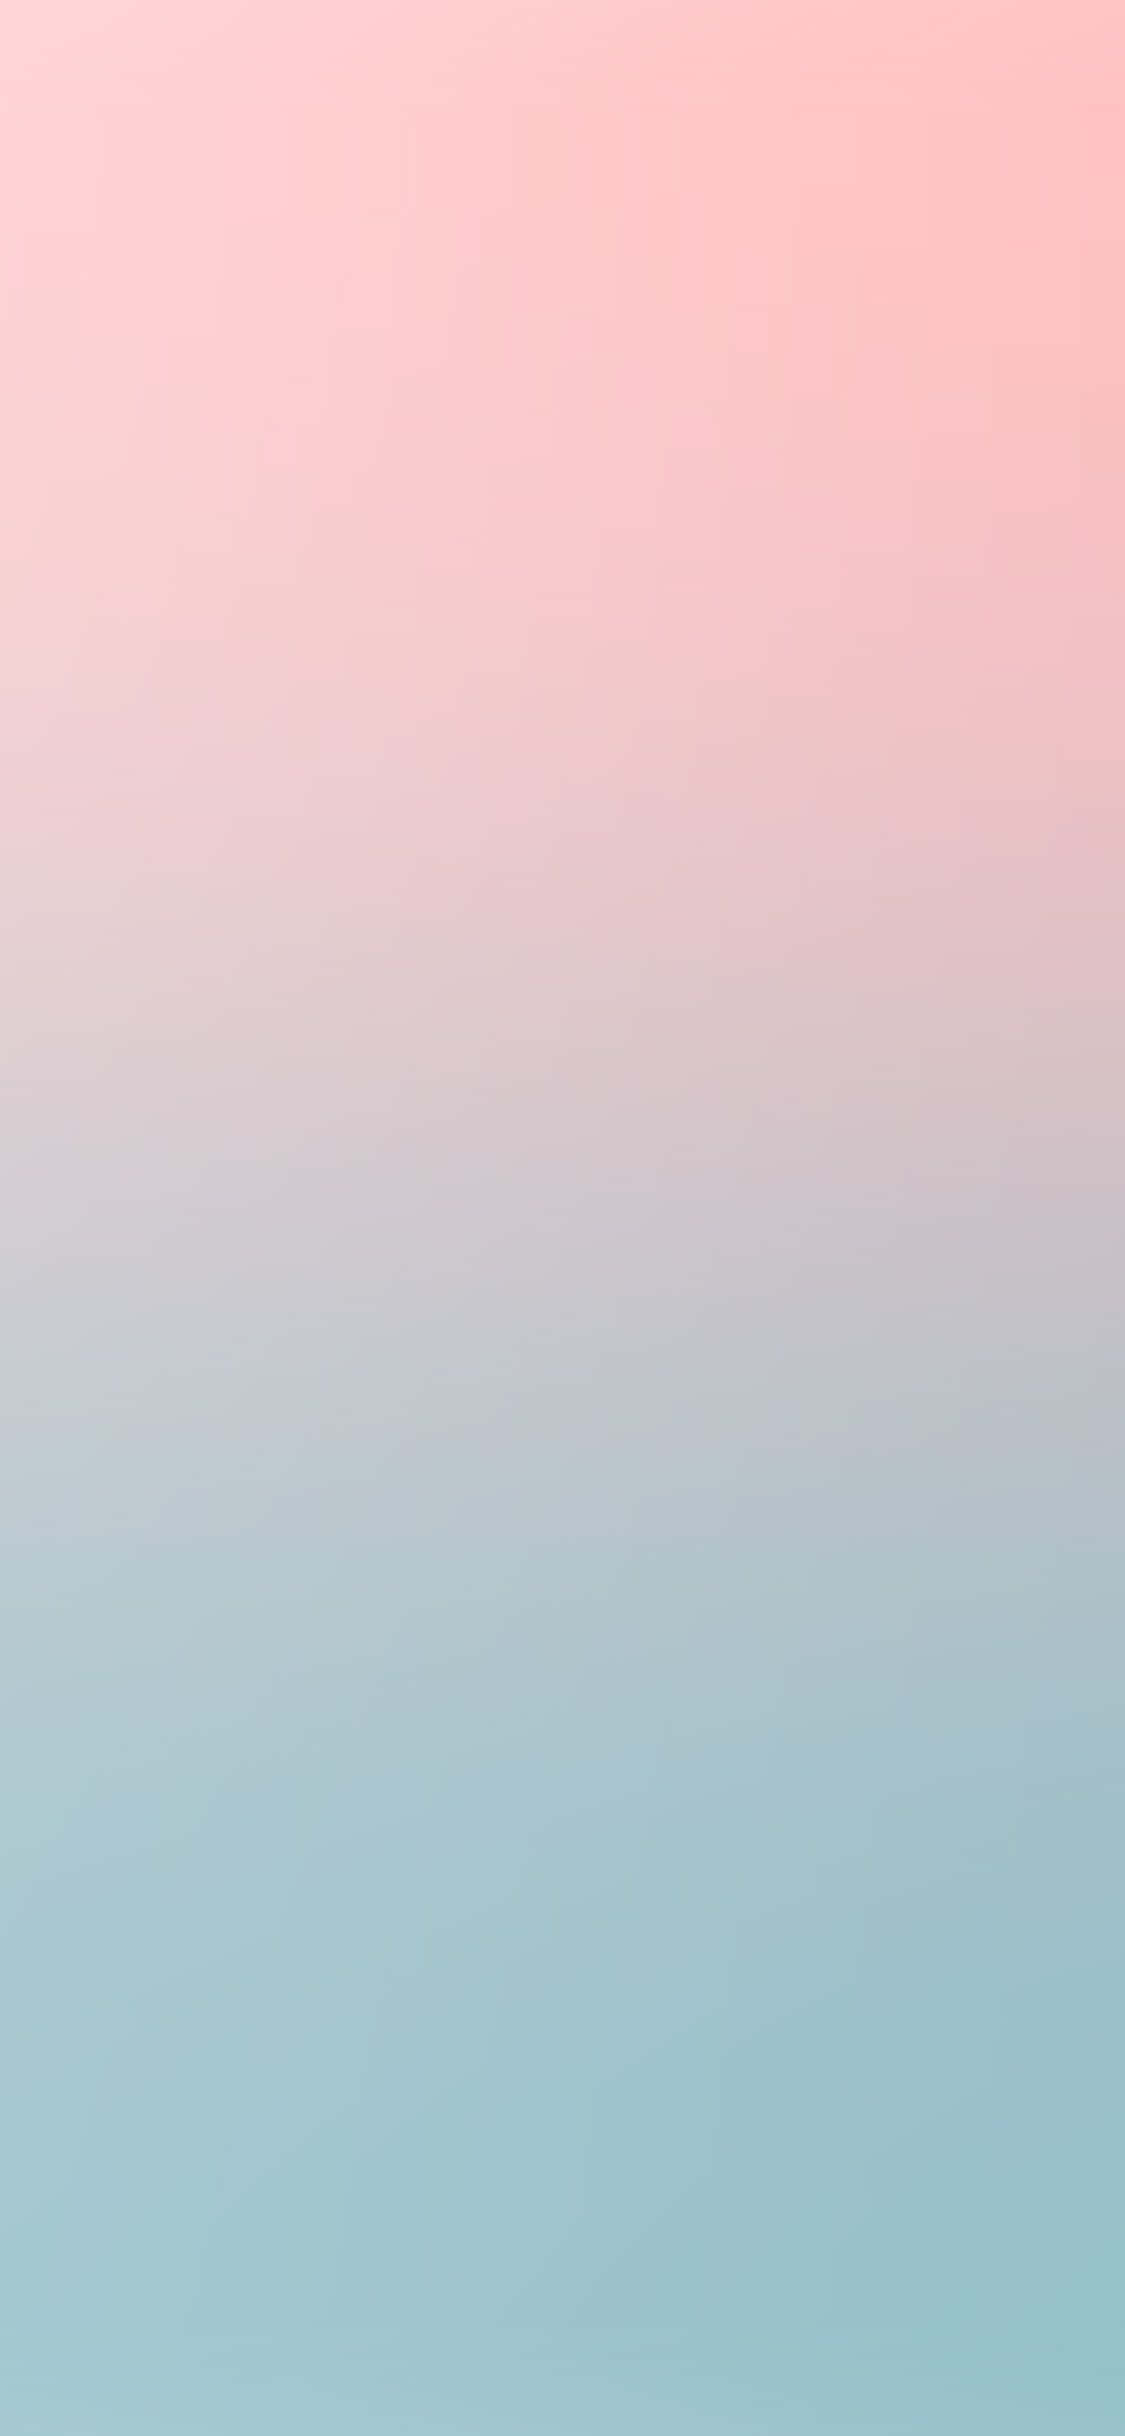 Beautiful pastel colored background